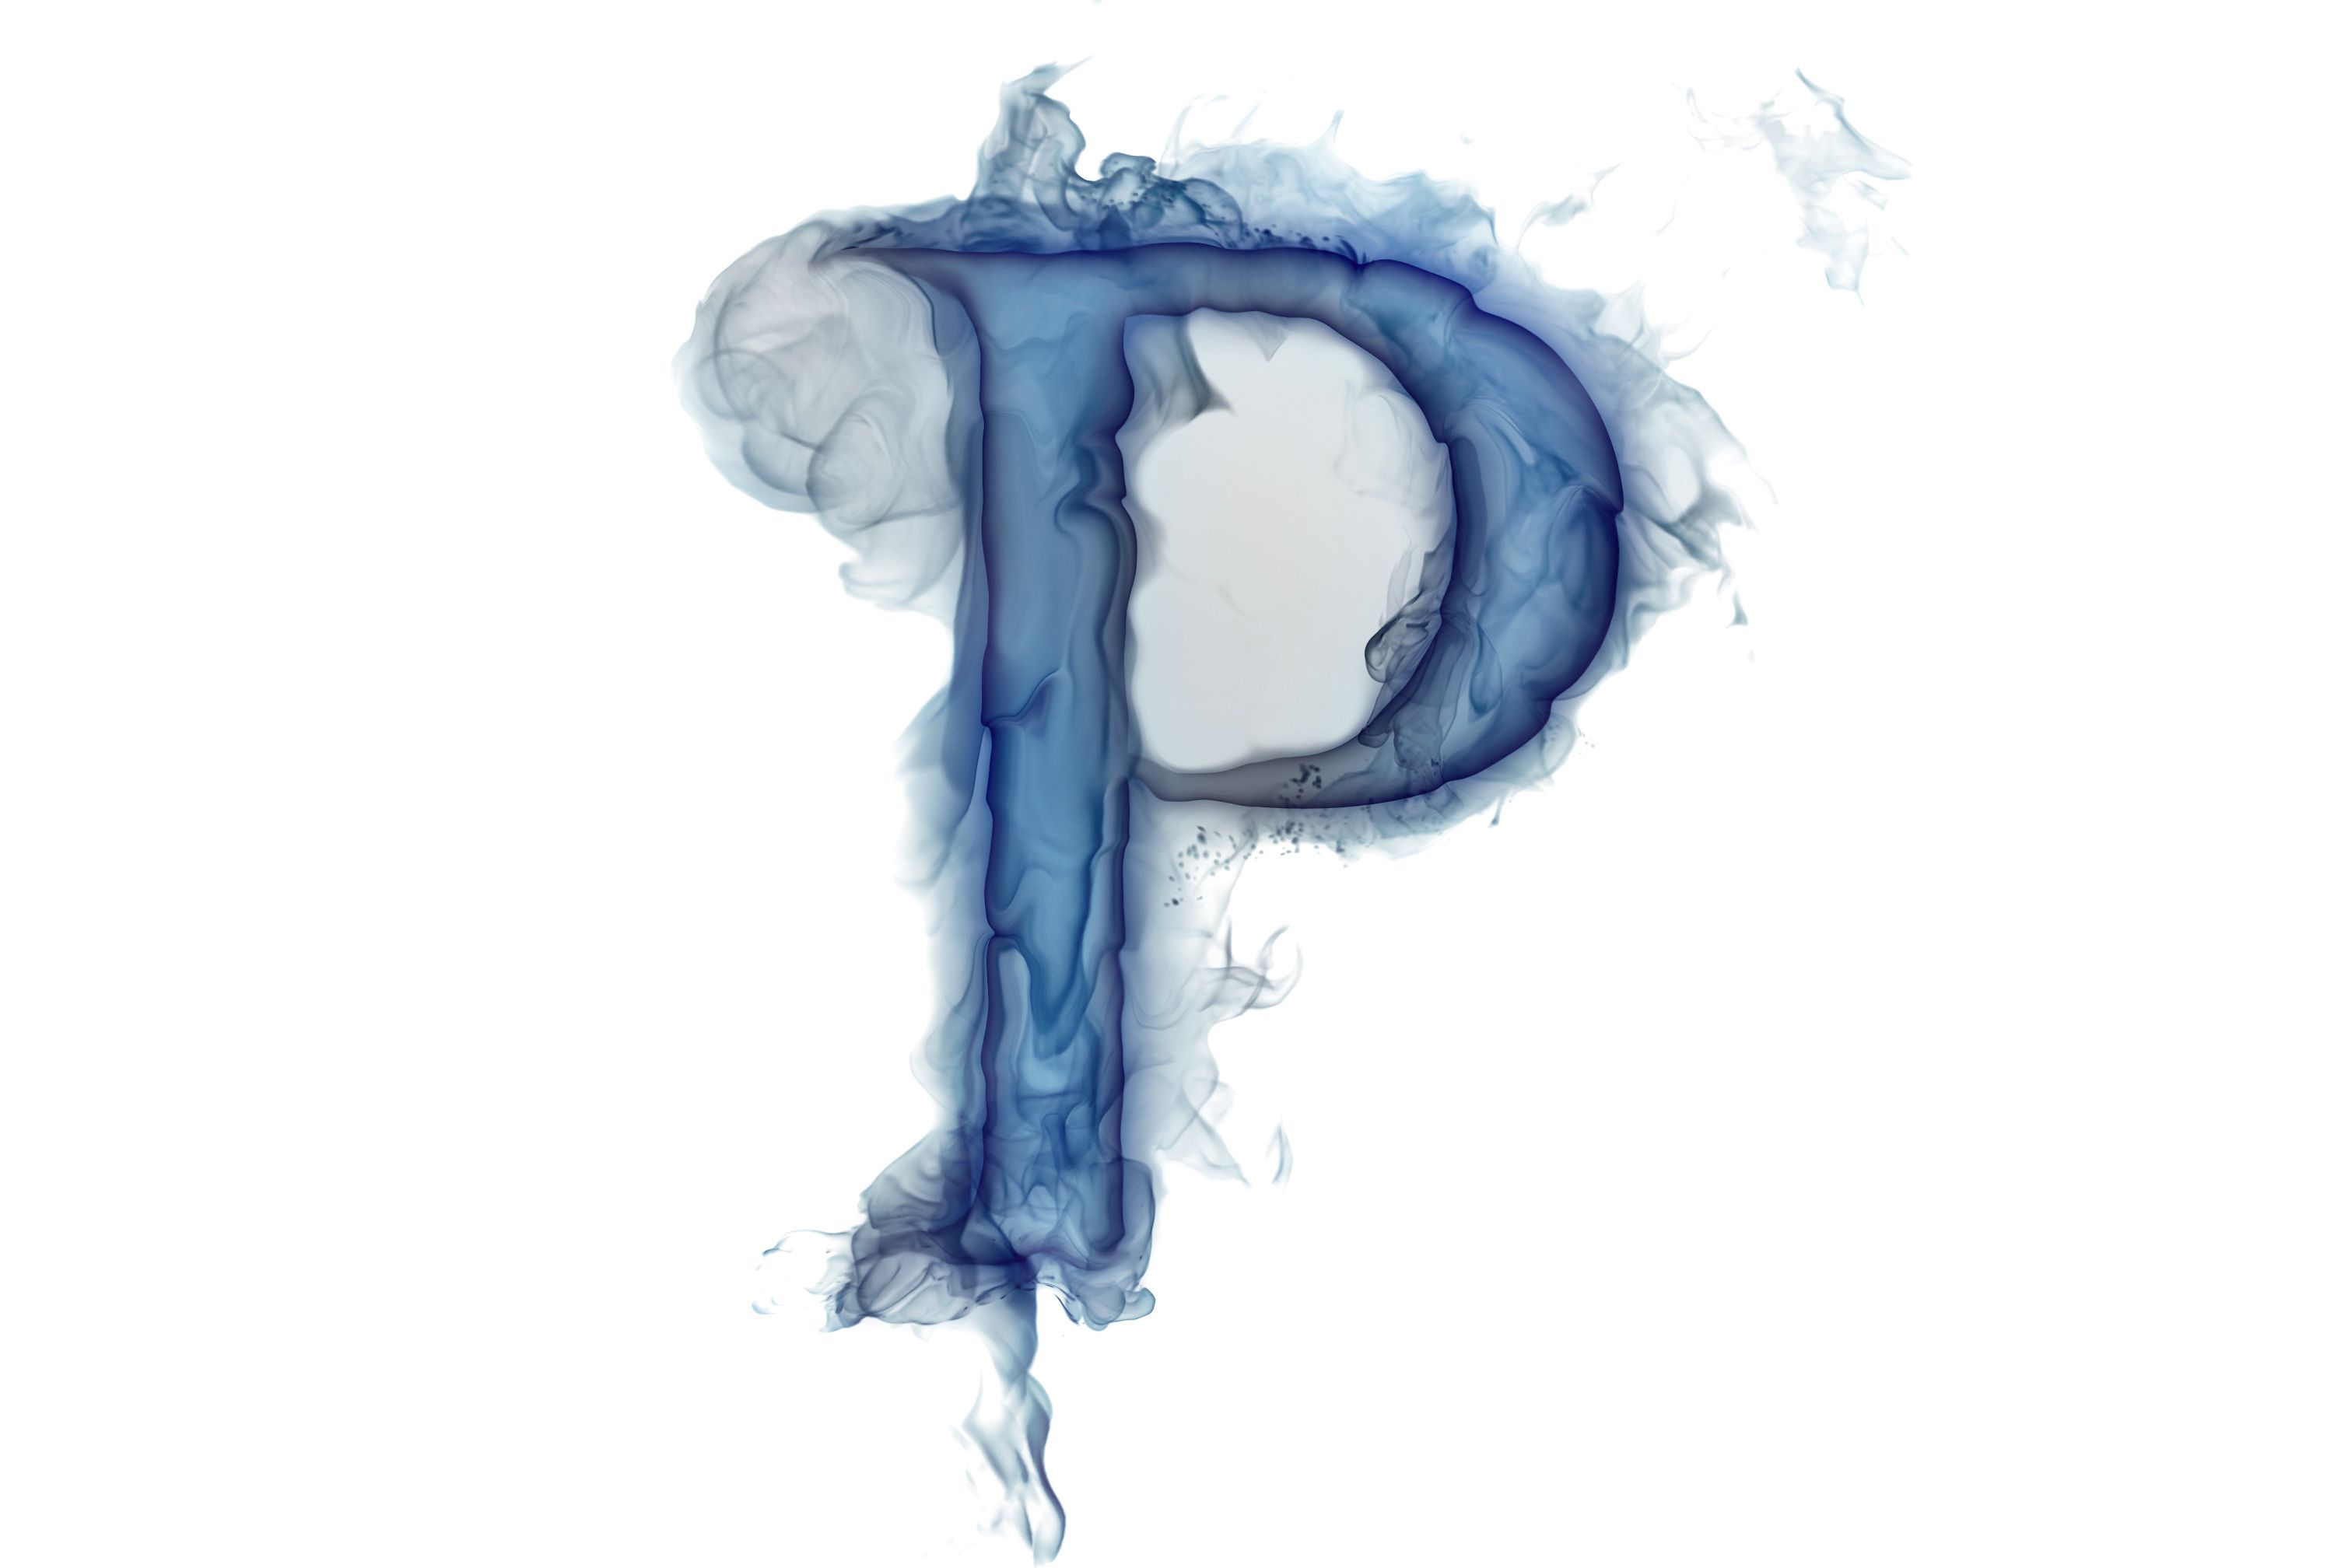 letter p wallpapers for mobile